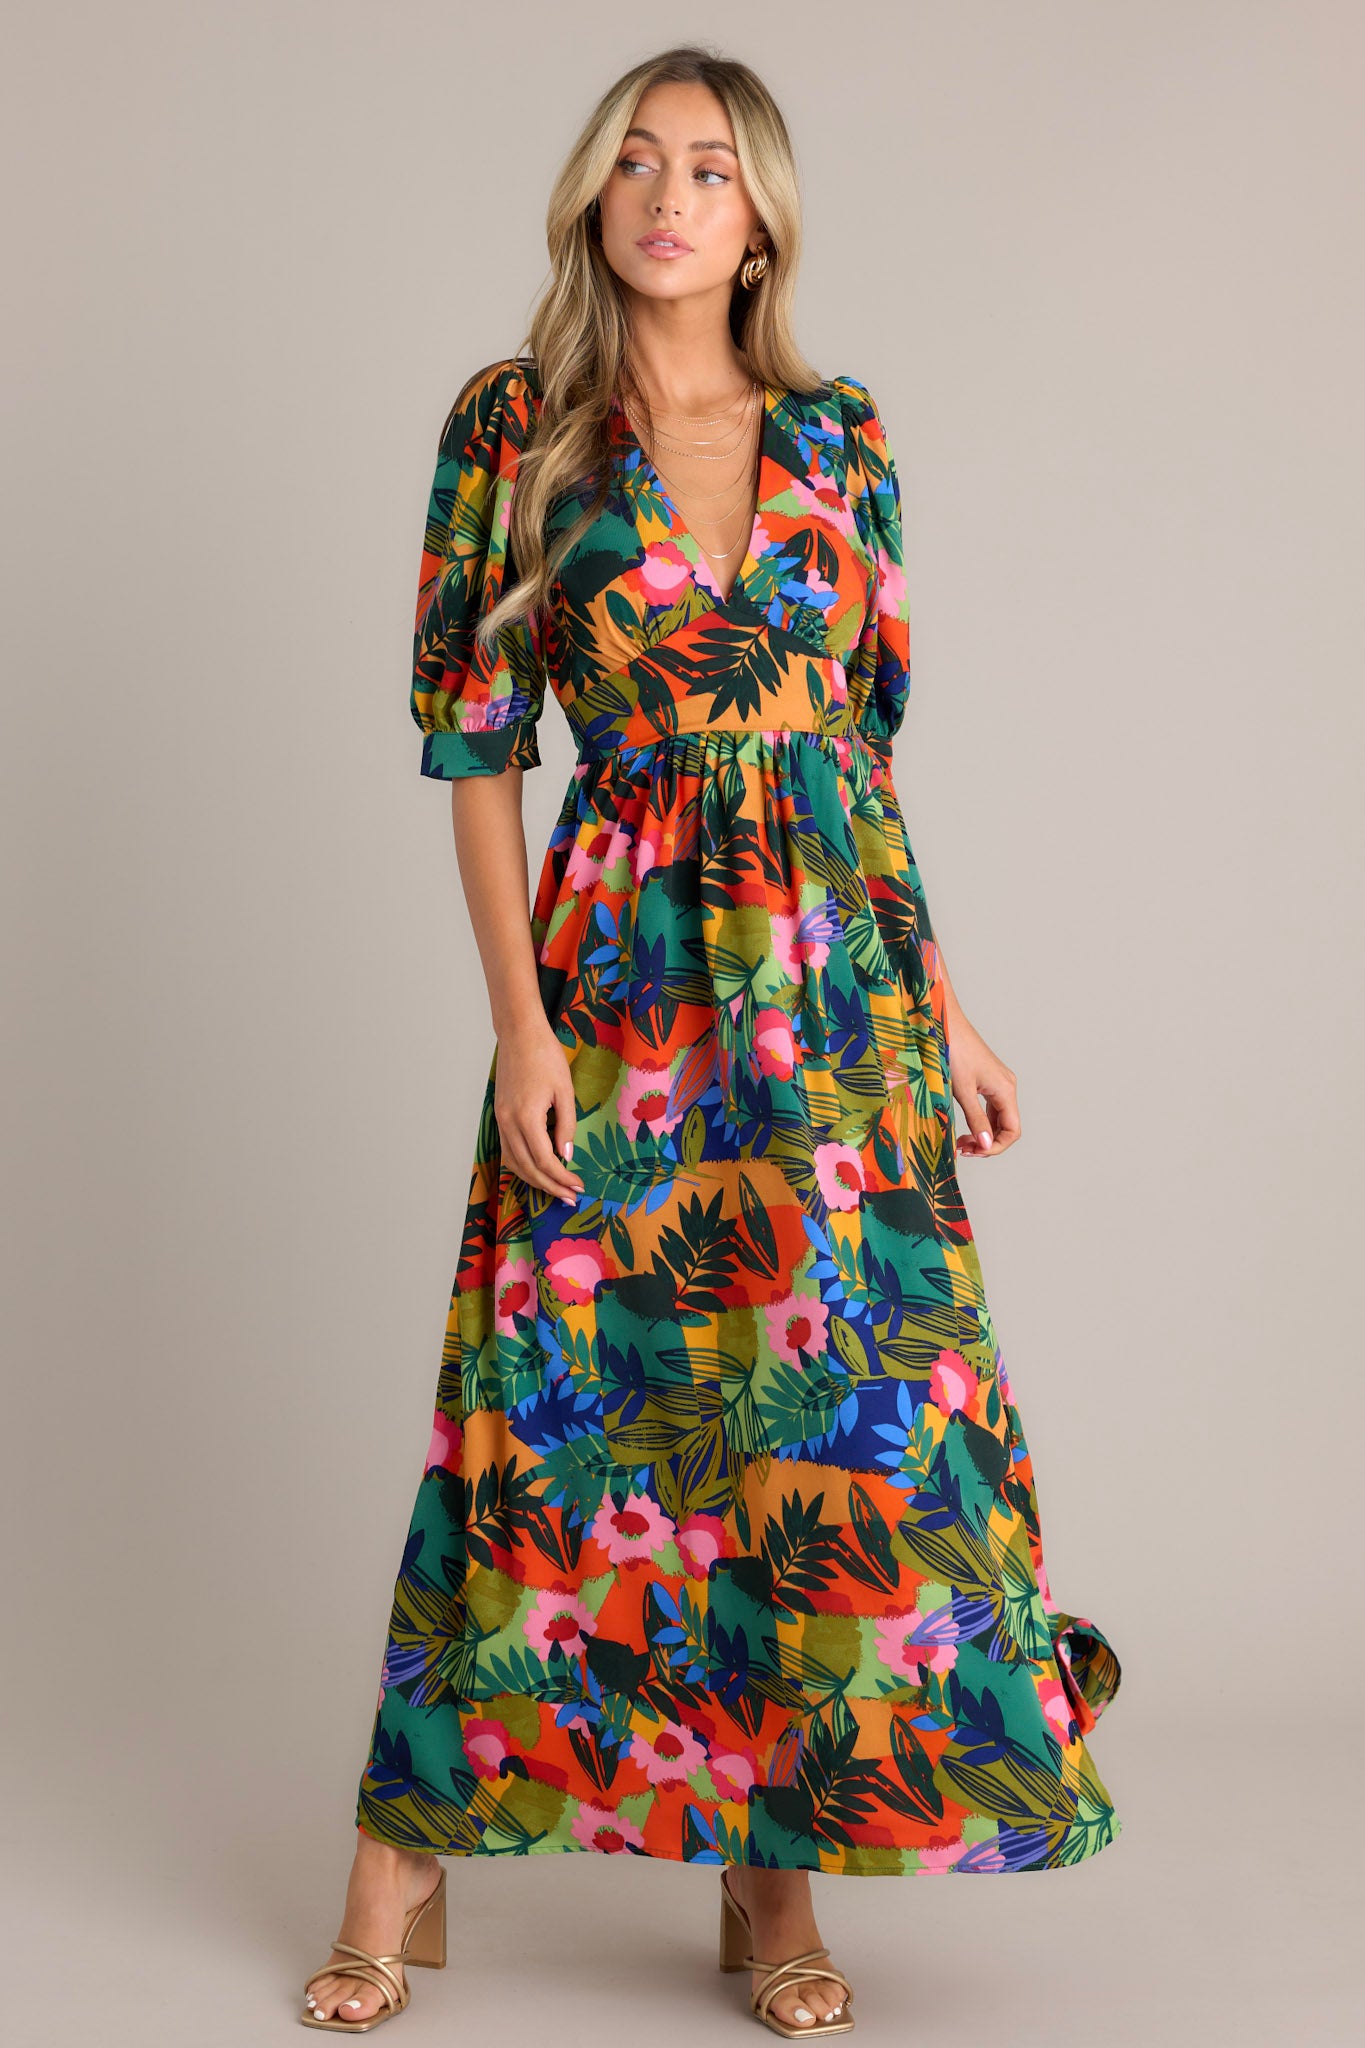 Angled view of a boldly patterned tropical dress with a flowing skirt and puff sleeves.